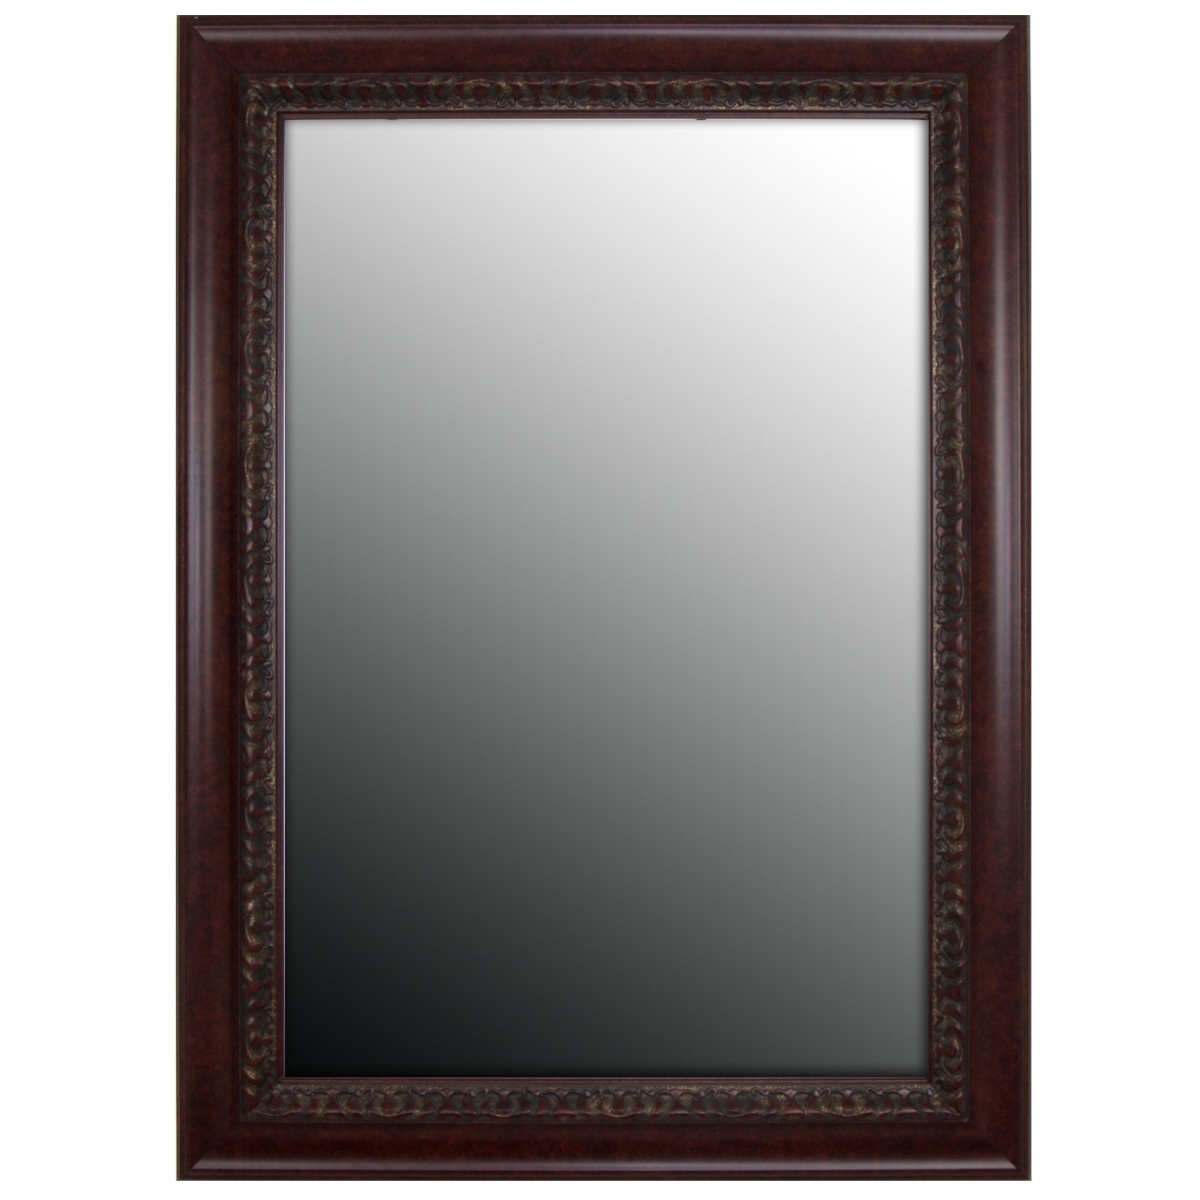 Hitchcock Butterfield 808403 Cherry Williamsburg Wall Mirror - 37 X 47 In.